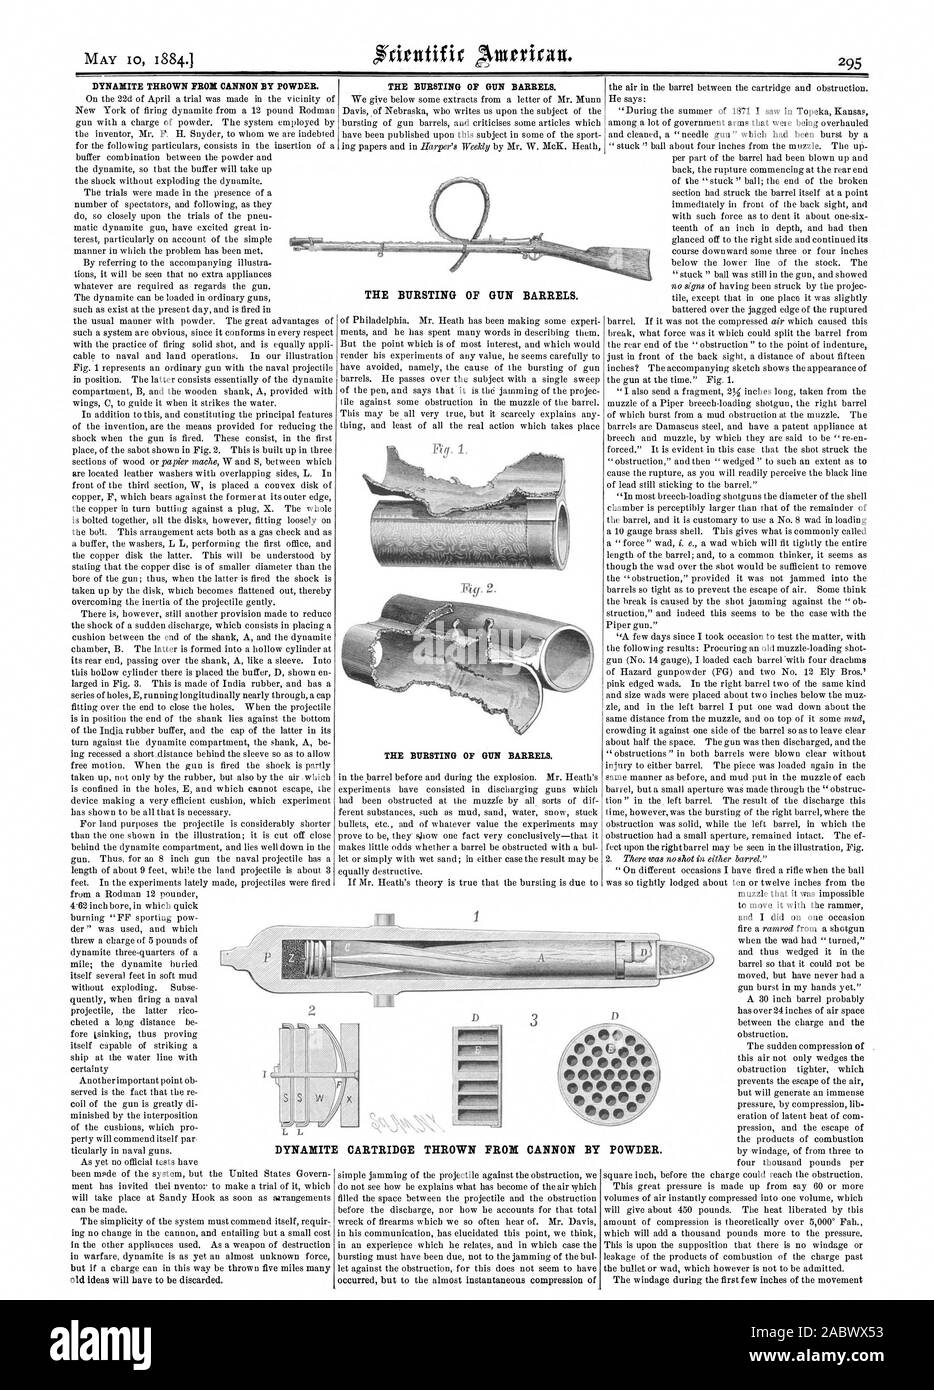 DYNAMITE CARTRIDGE THROWN FROM CANNON BY THE BURSTING OF GUN BARRELS., scientific american, 1884-05-10 Stock Photo